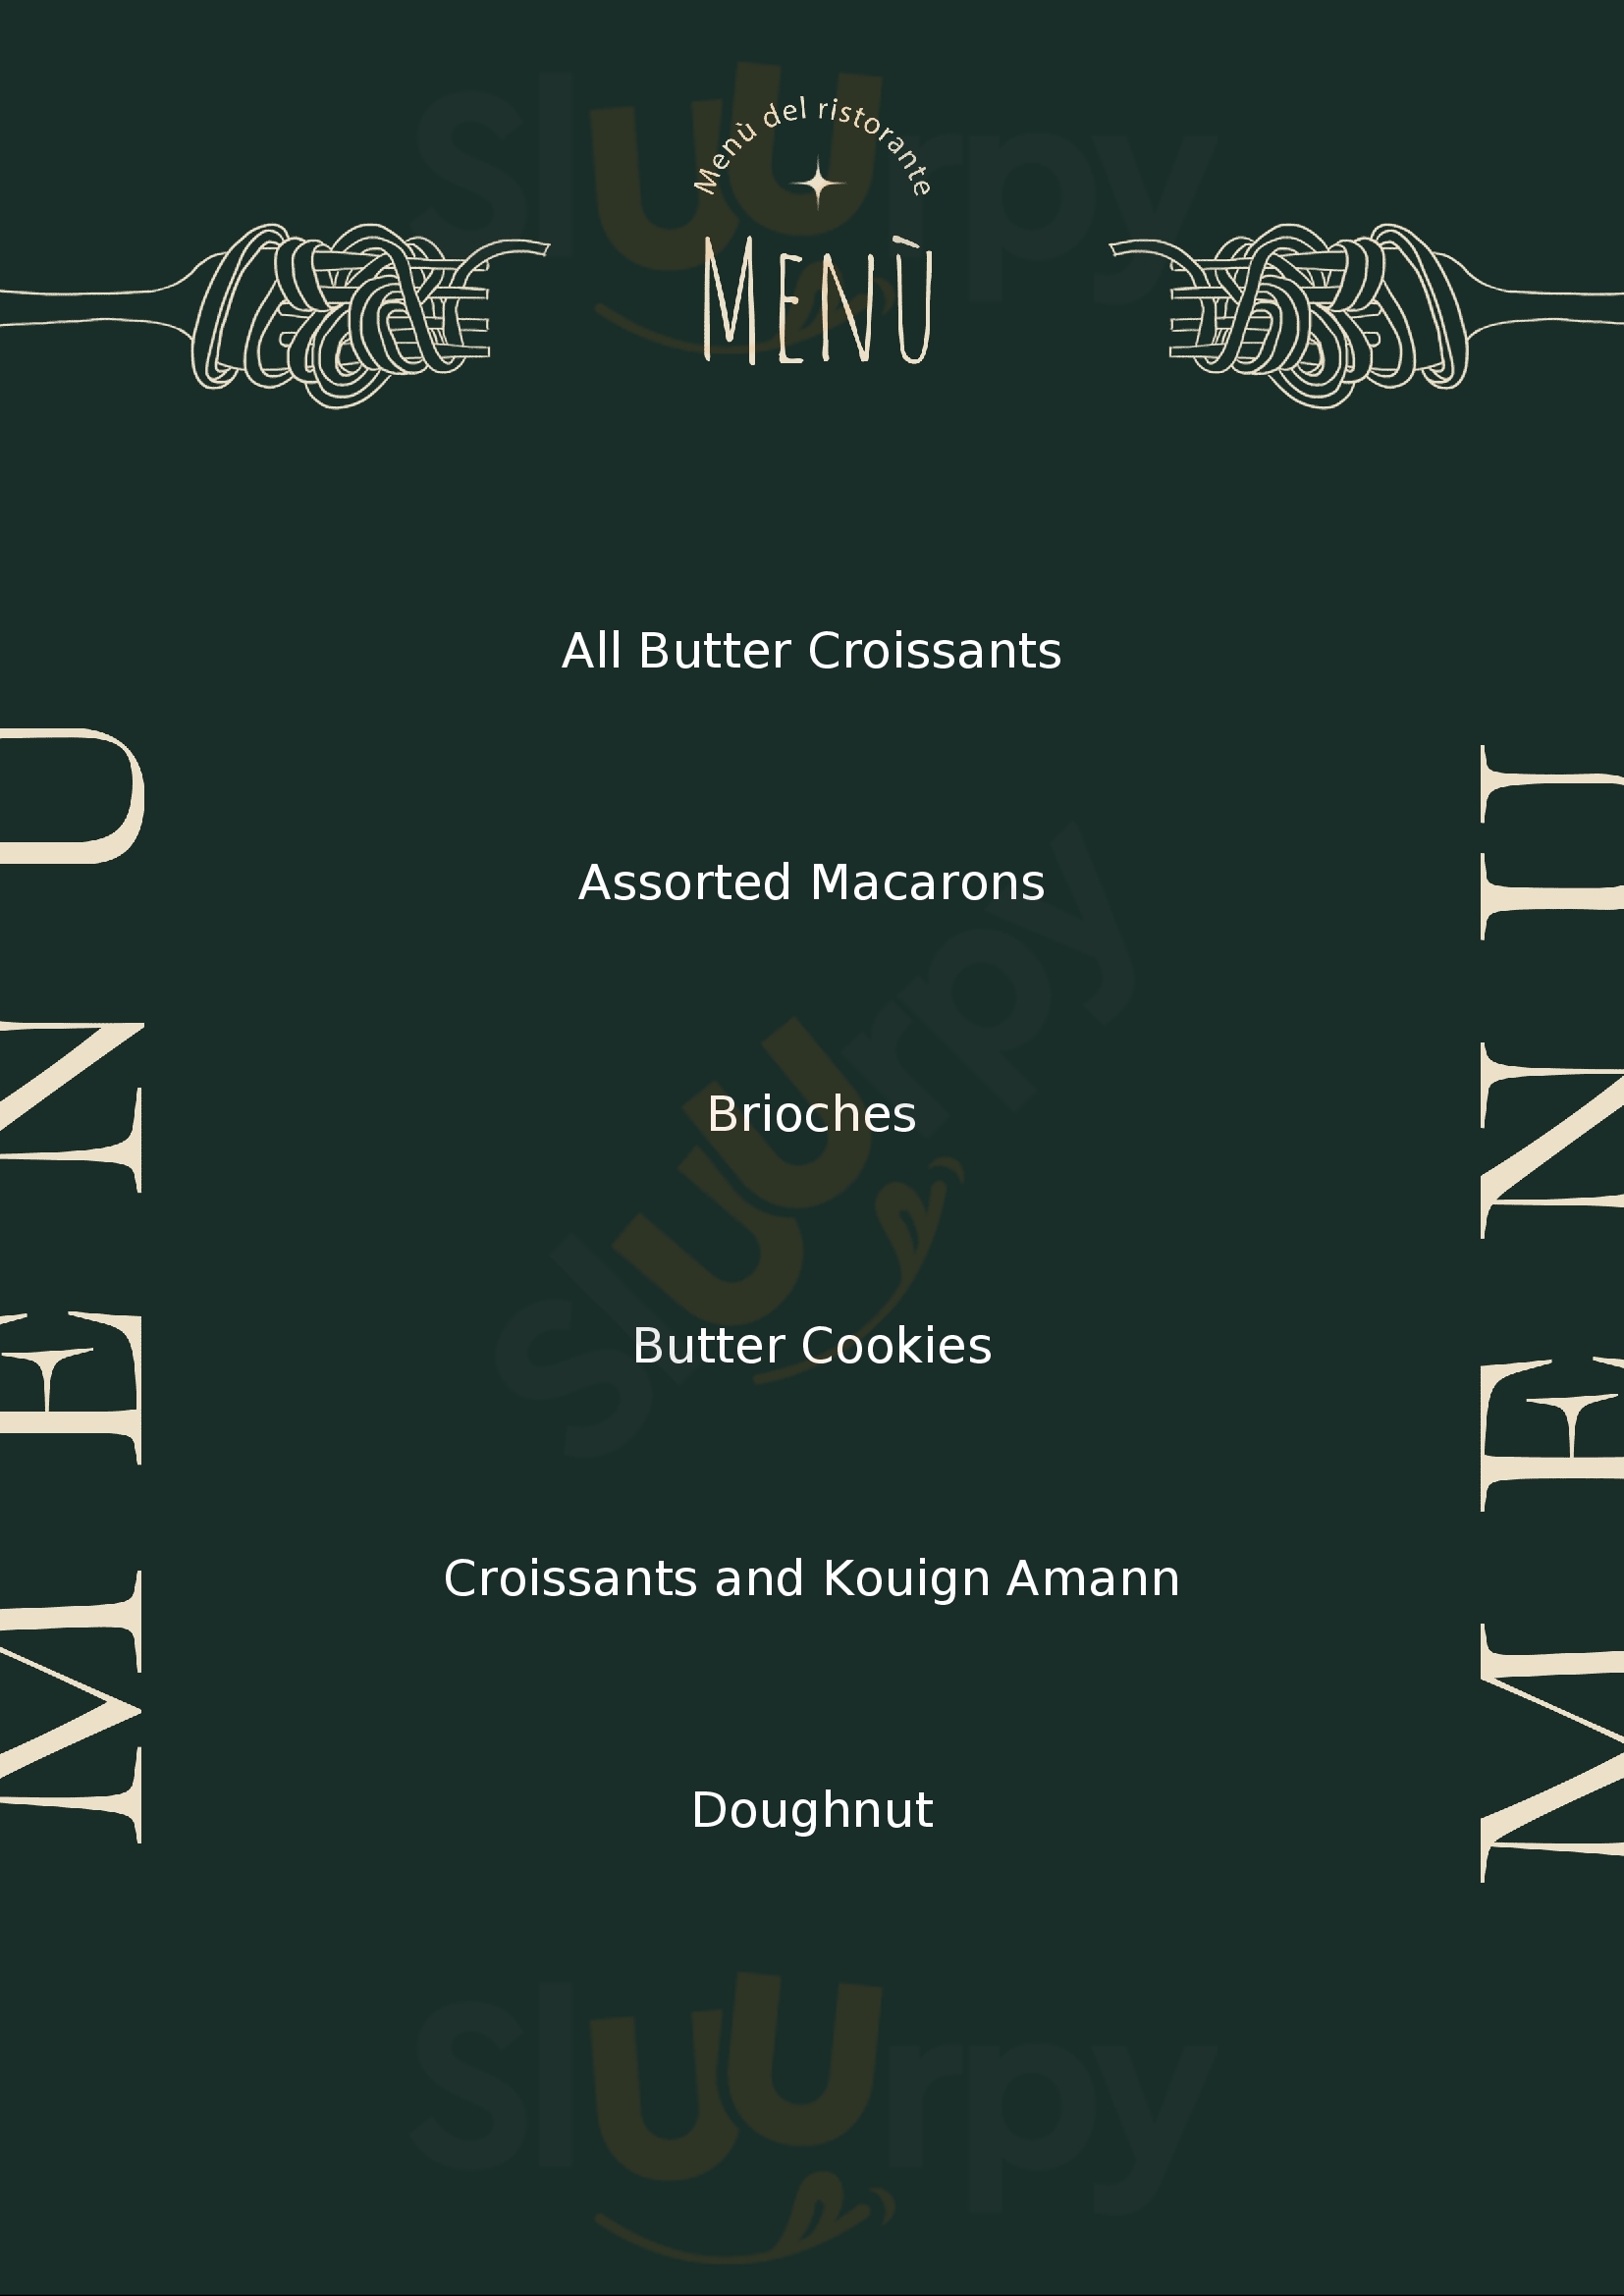 Jean-marc Chatellier's French Bakery Pittsburgh Menu - 1